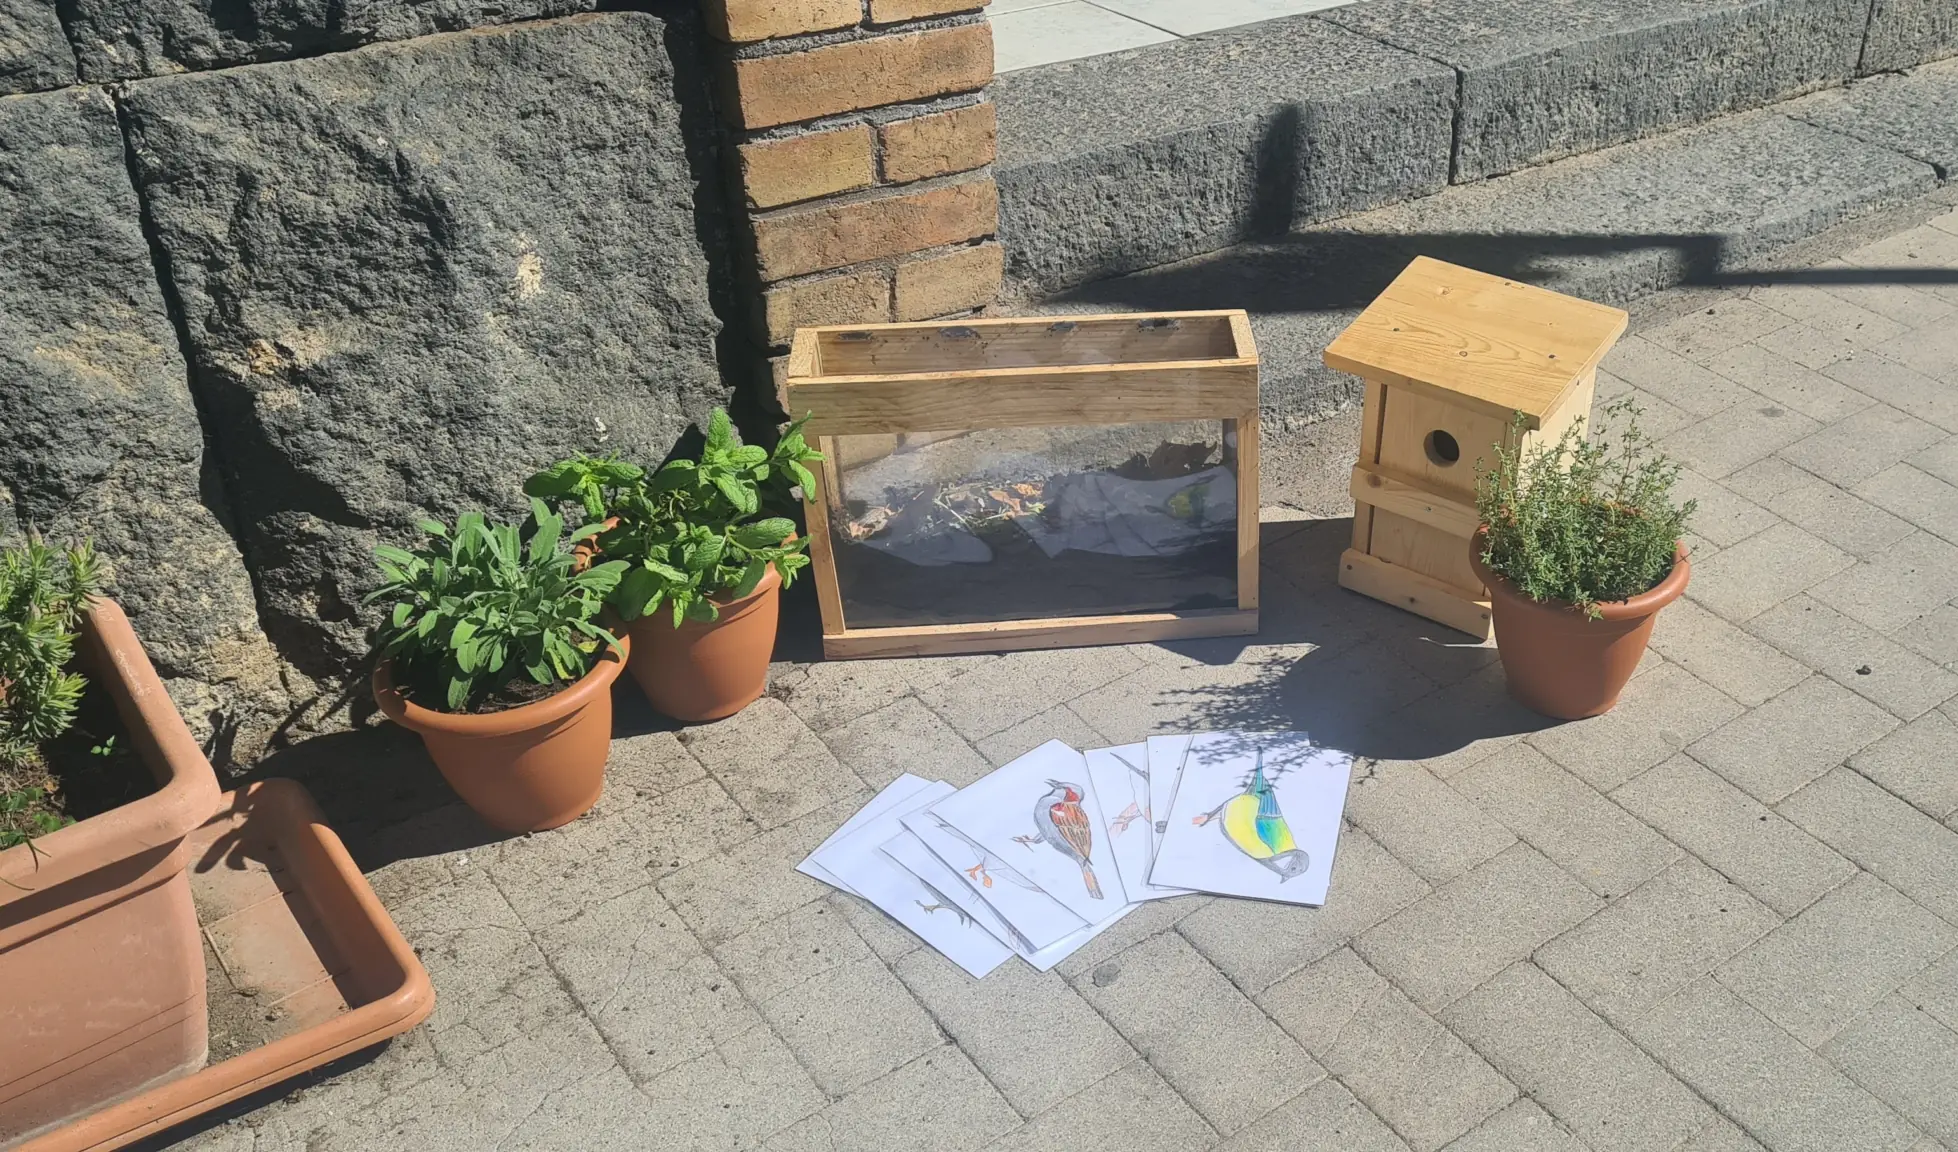 Material for the outdoor lessons: Plants, worm box, bird house, bird cards